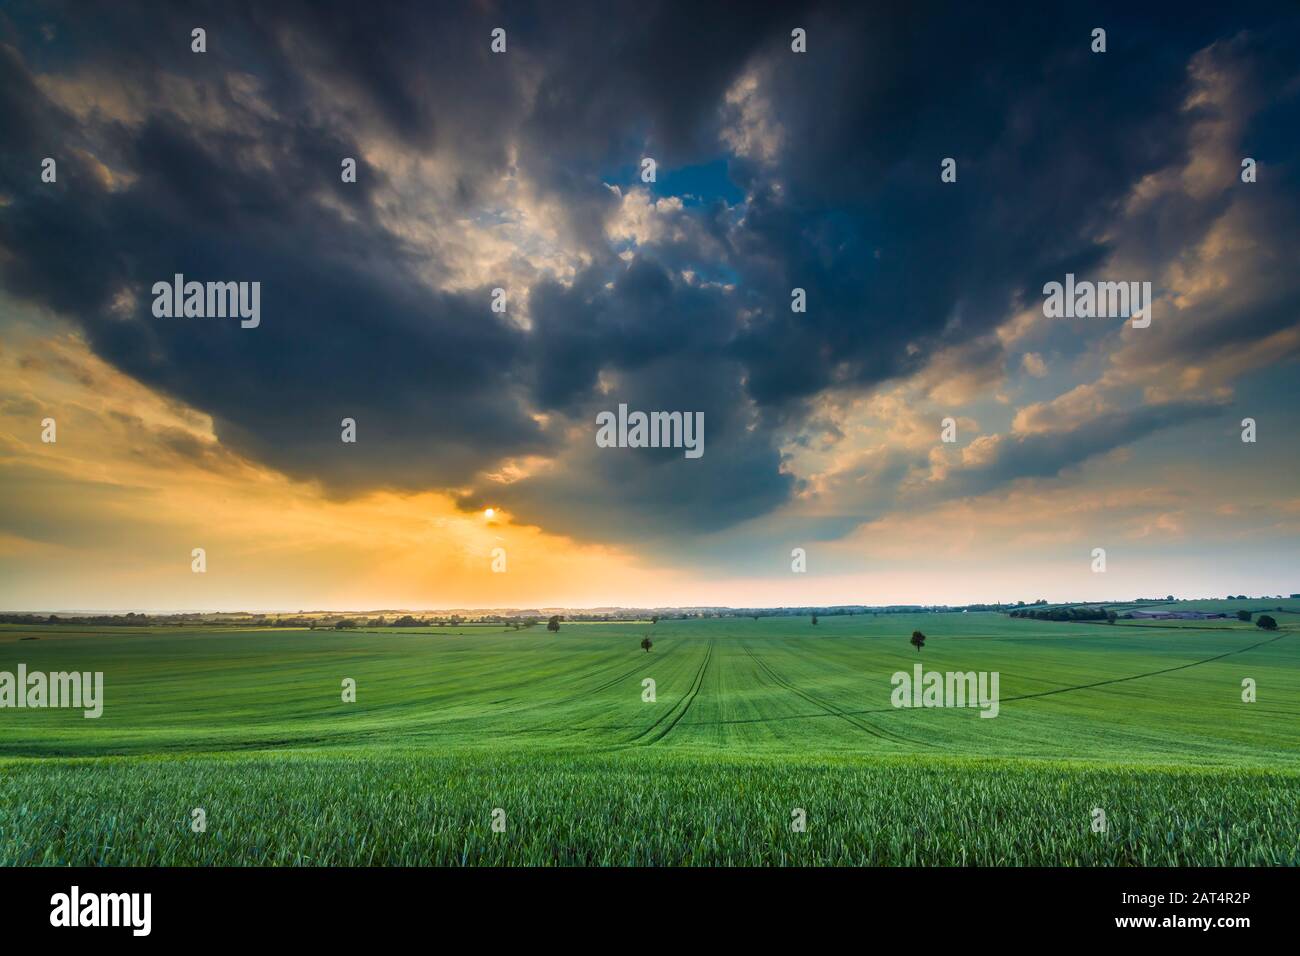 View across a wheatfield as a summer storm rolls in. Stock Photo